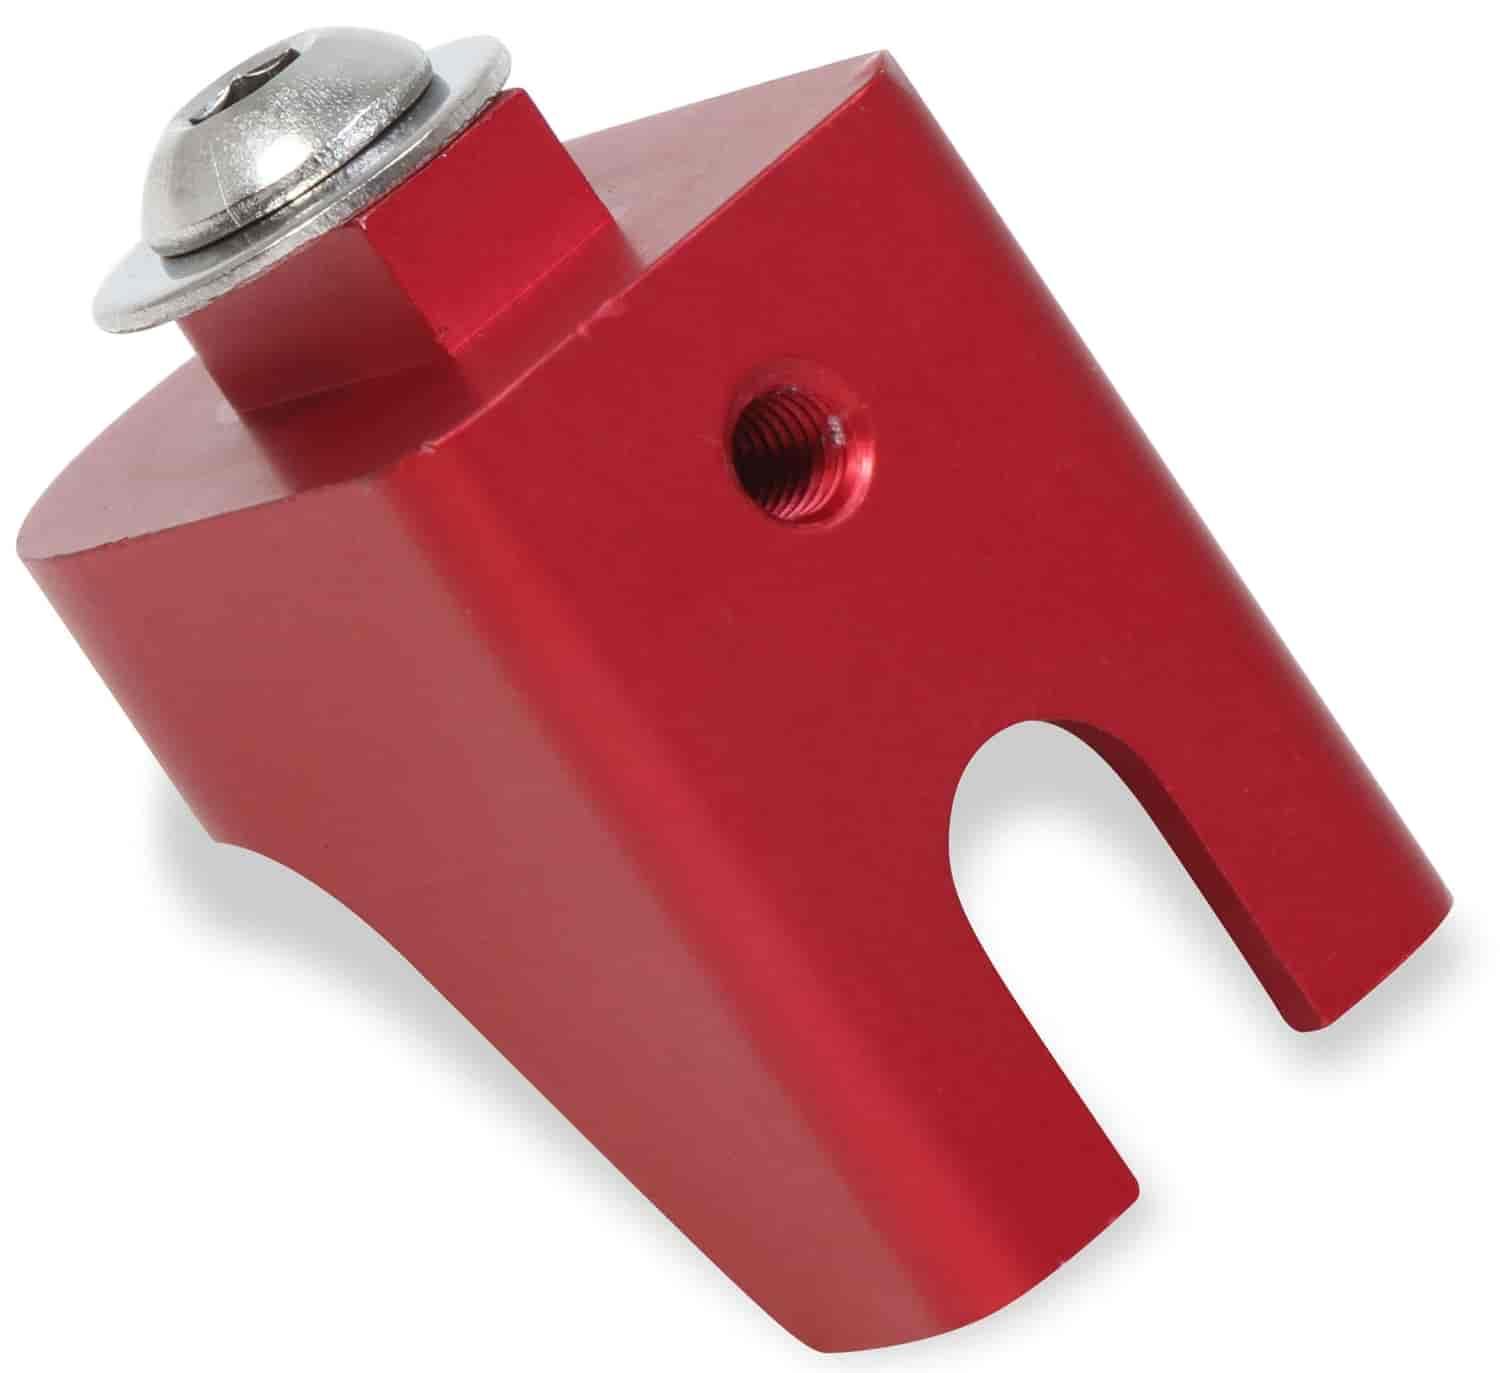 Cable Mount Bracket Fits Ford-Style Cable, Use With Throttle Cable Bracket - Red Finish